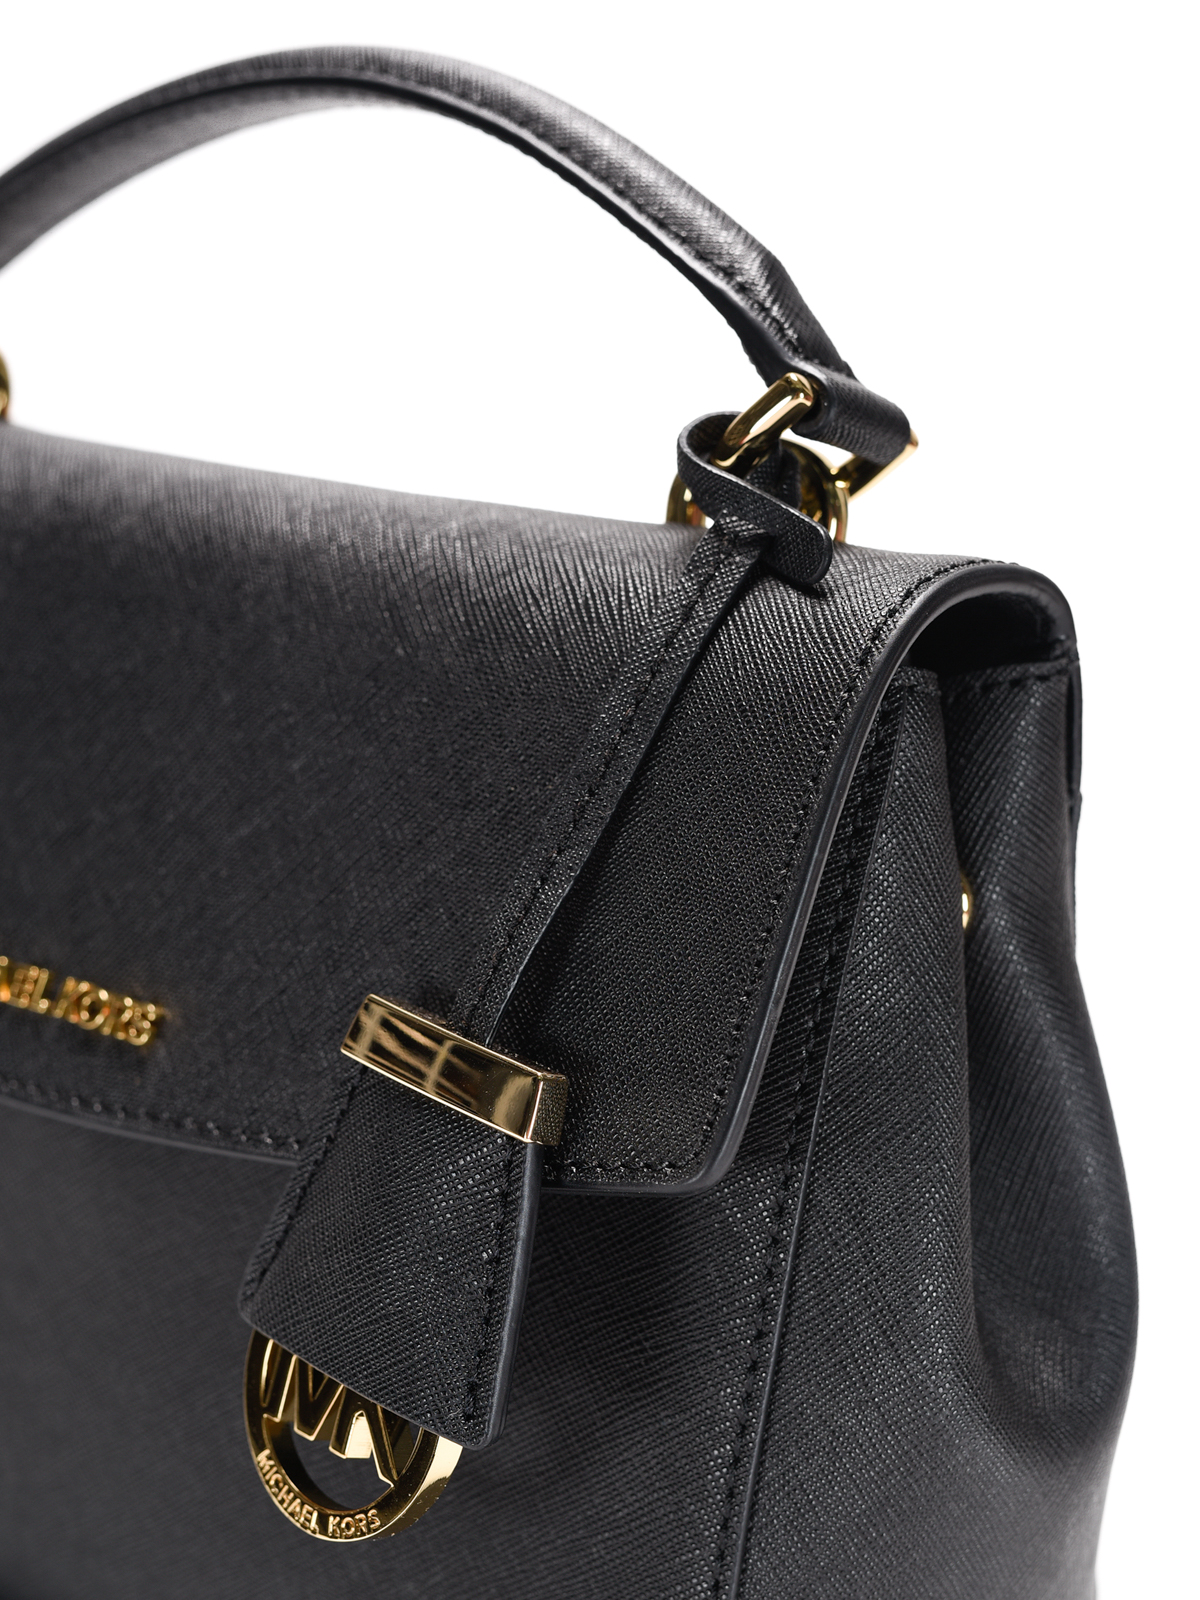 Michael Kors Ava Small Top Handle Leather Satchel with Black Bow